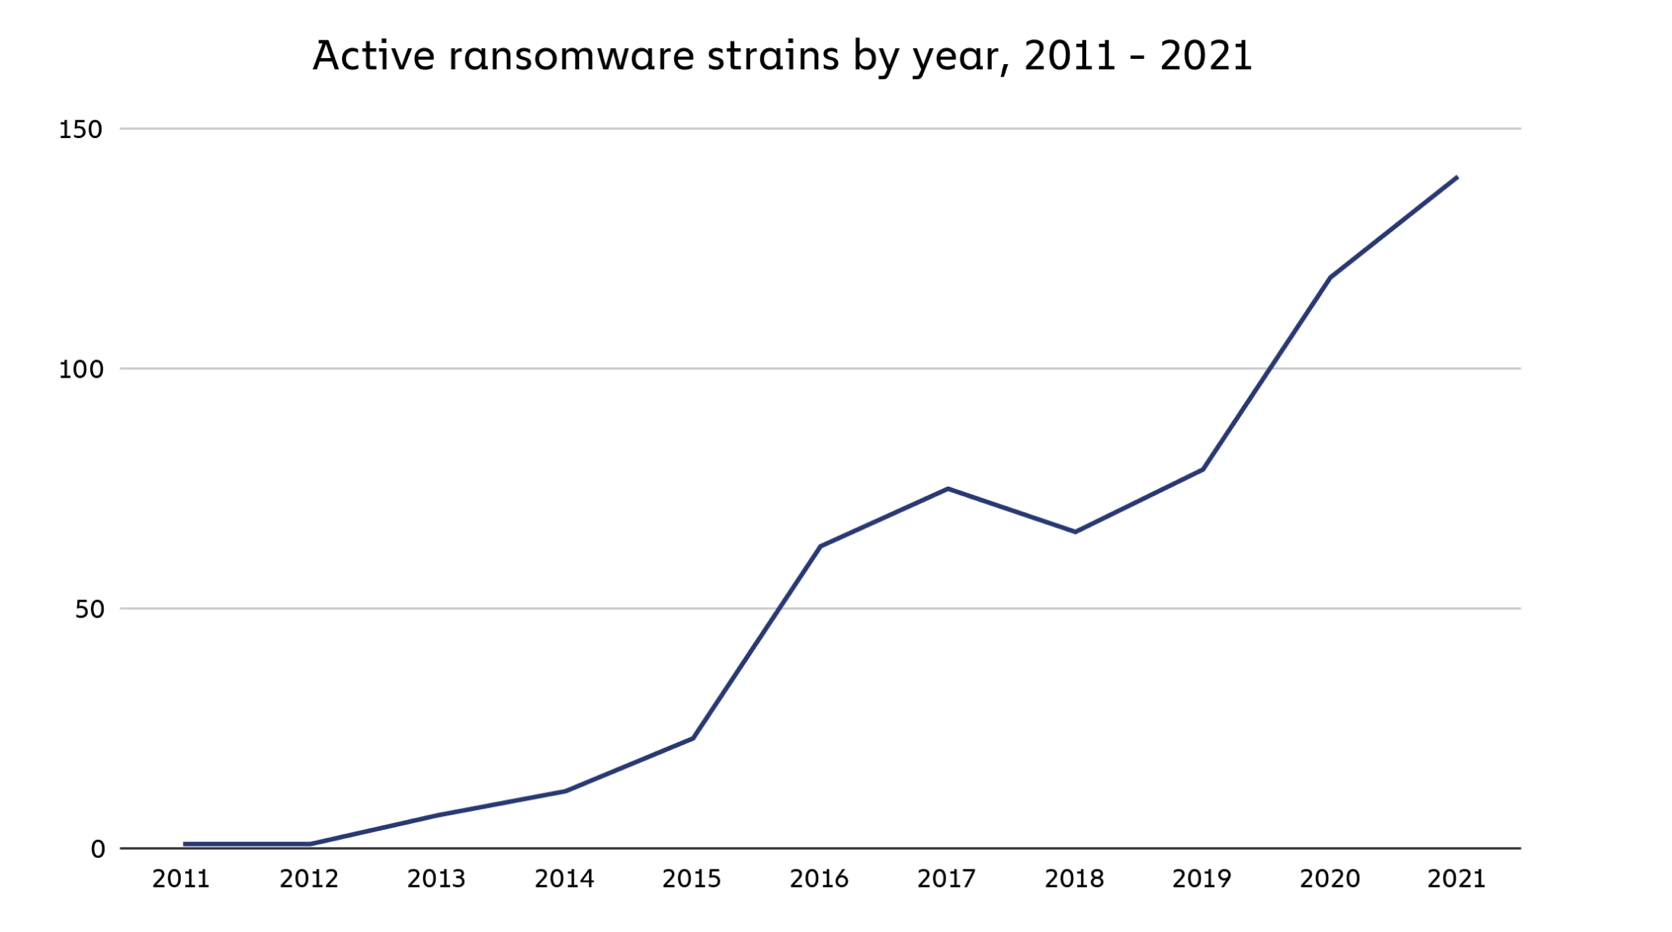  Active ransomware strains by year, 2011 - 2021 | Chainanalysis